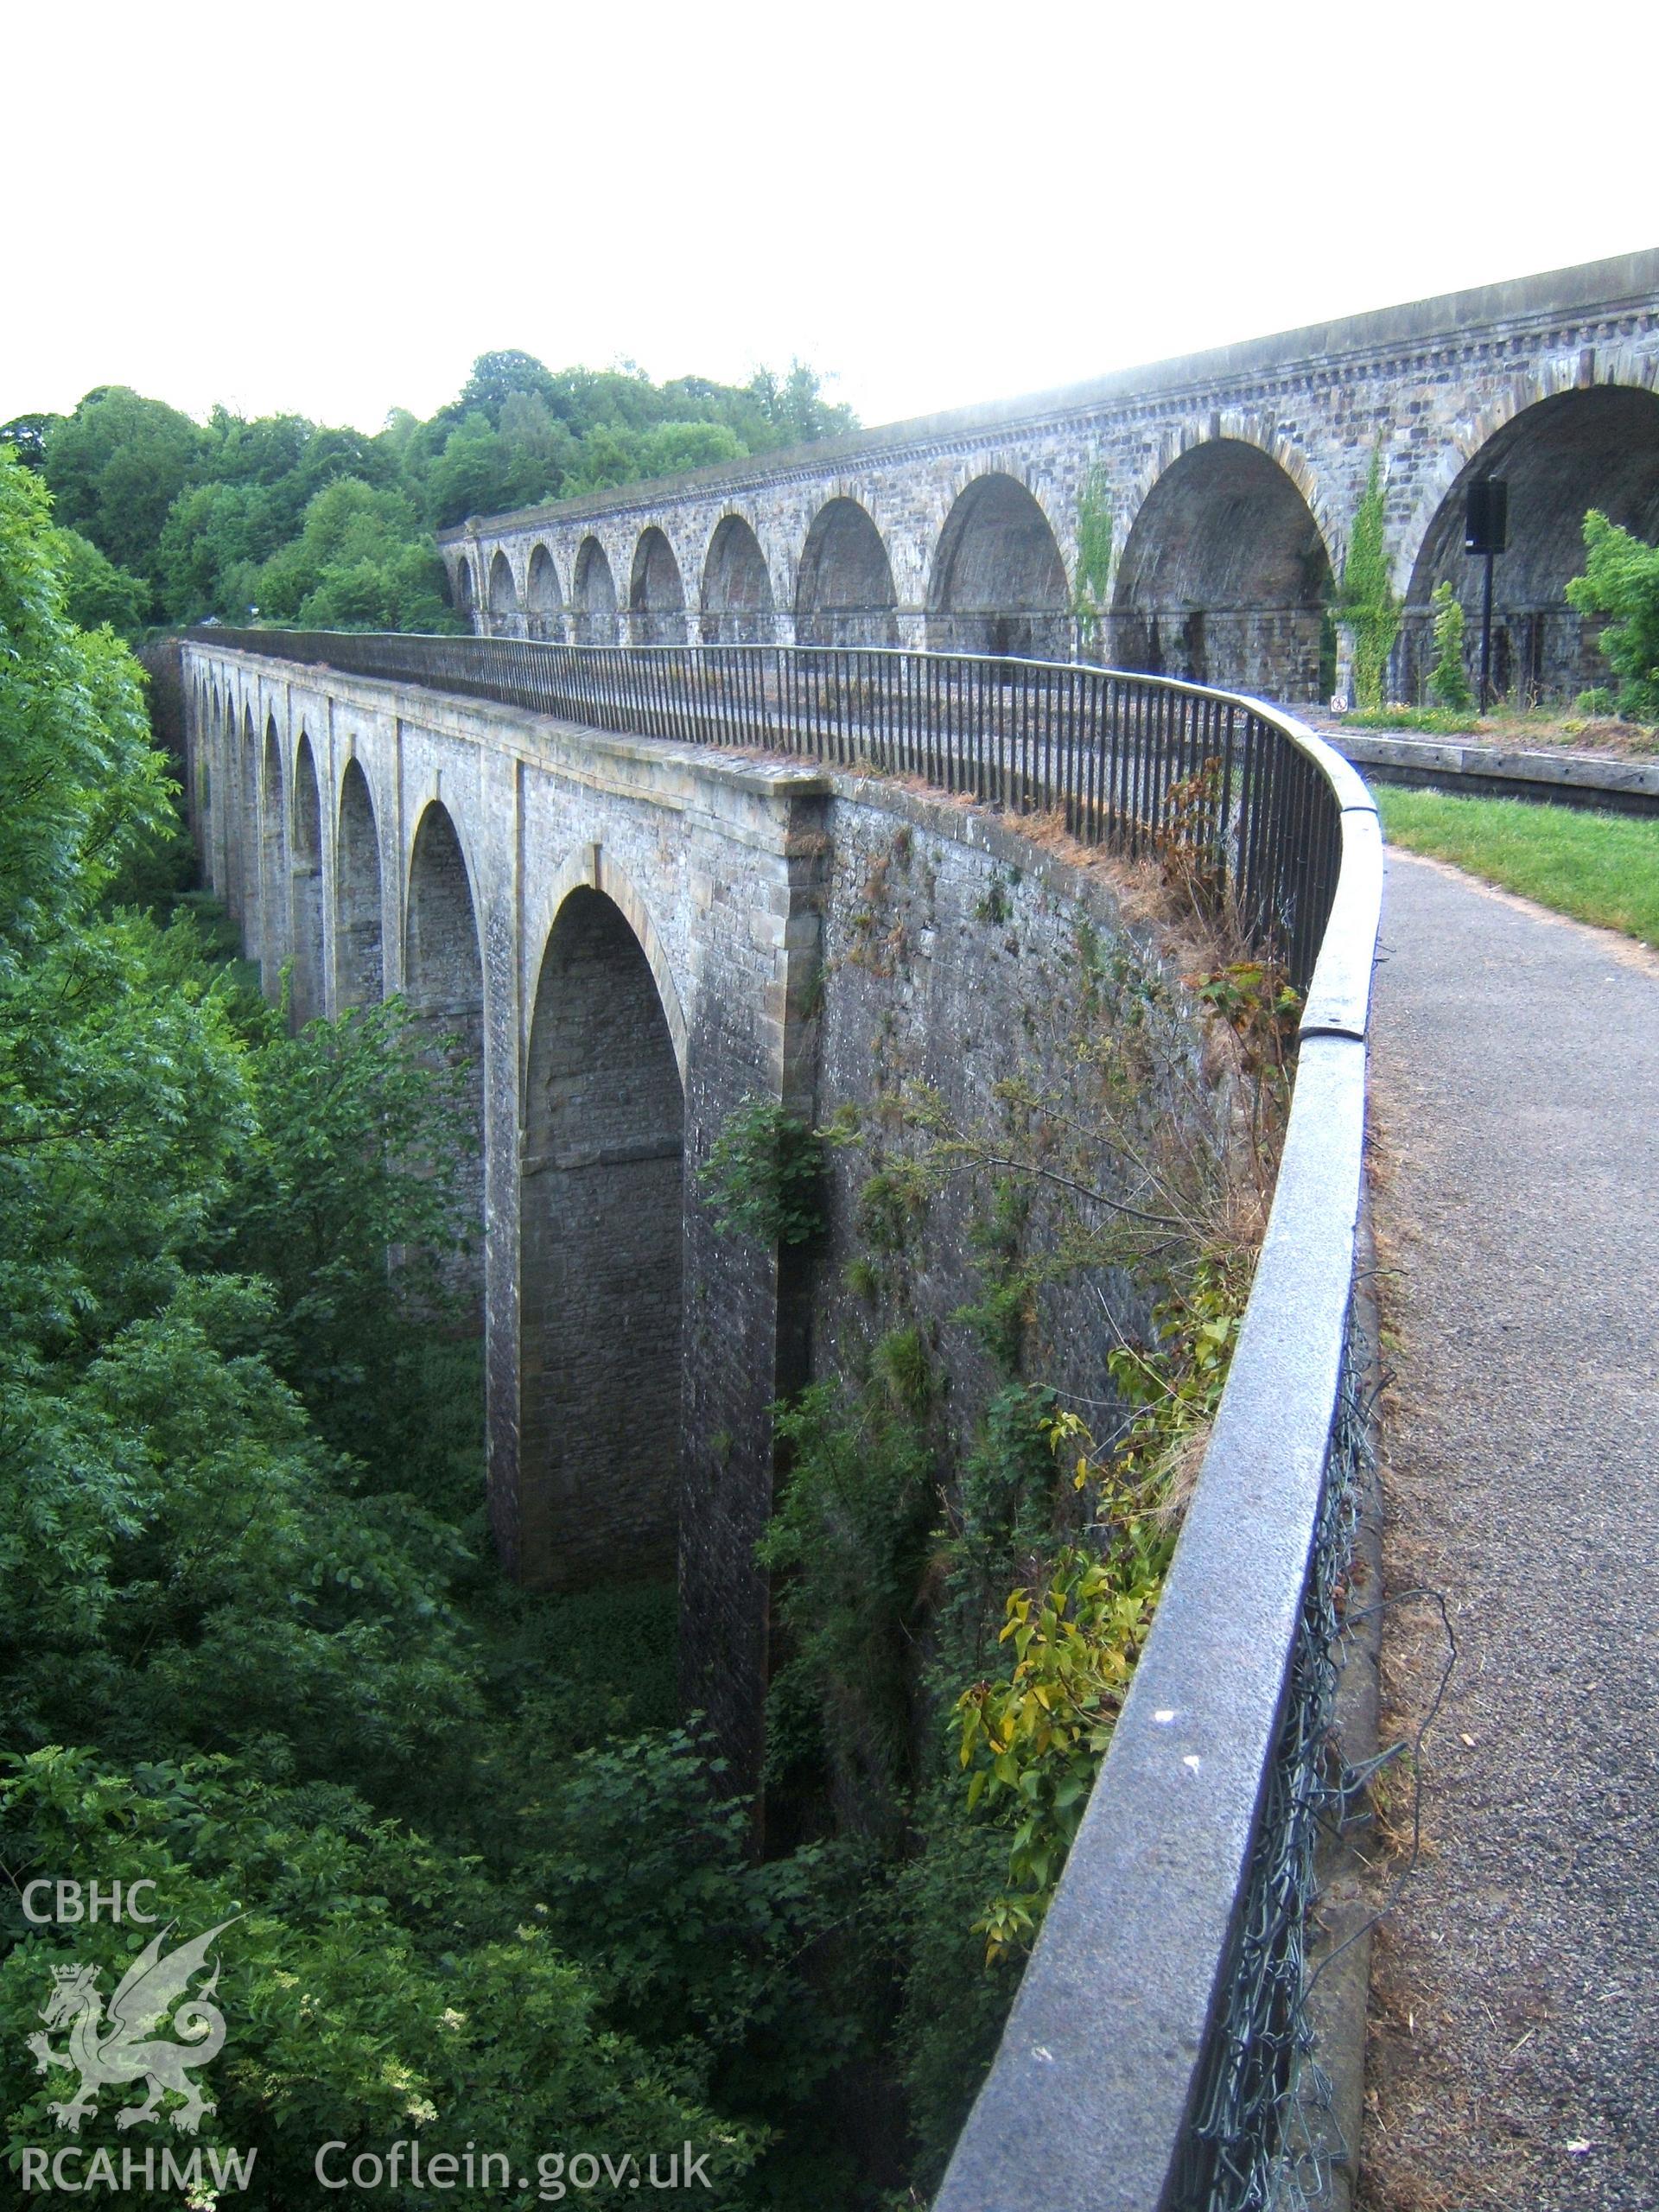 North-east elevations of Chirk Aqueduct and Viaduct from the north with north abutment.